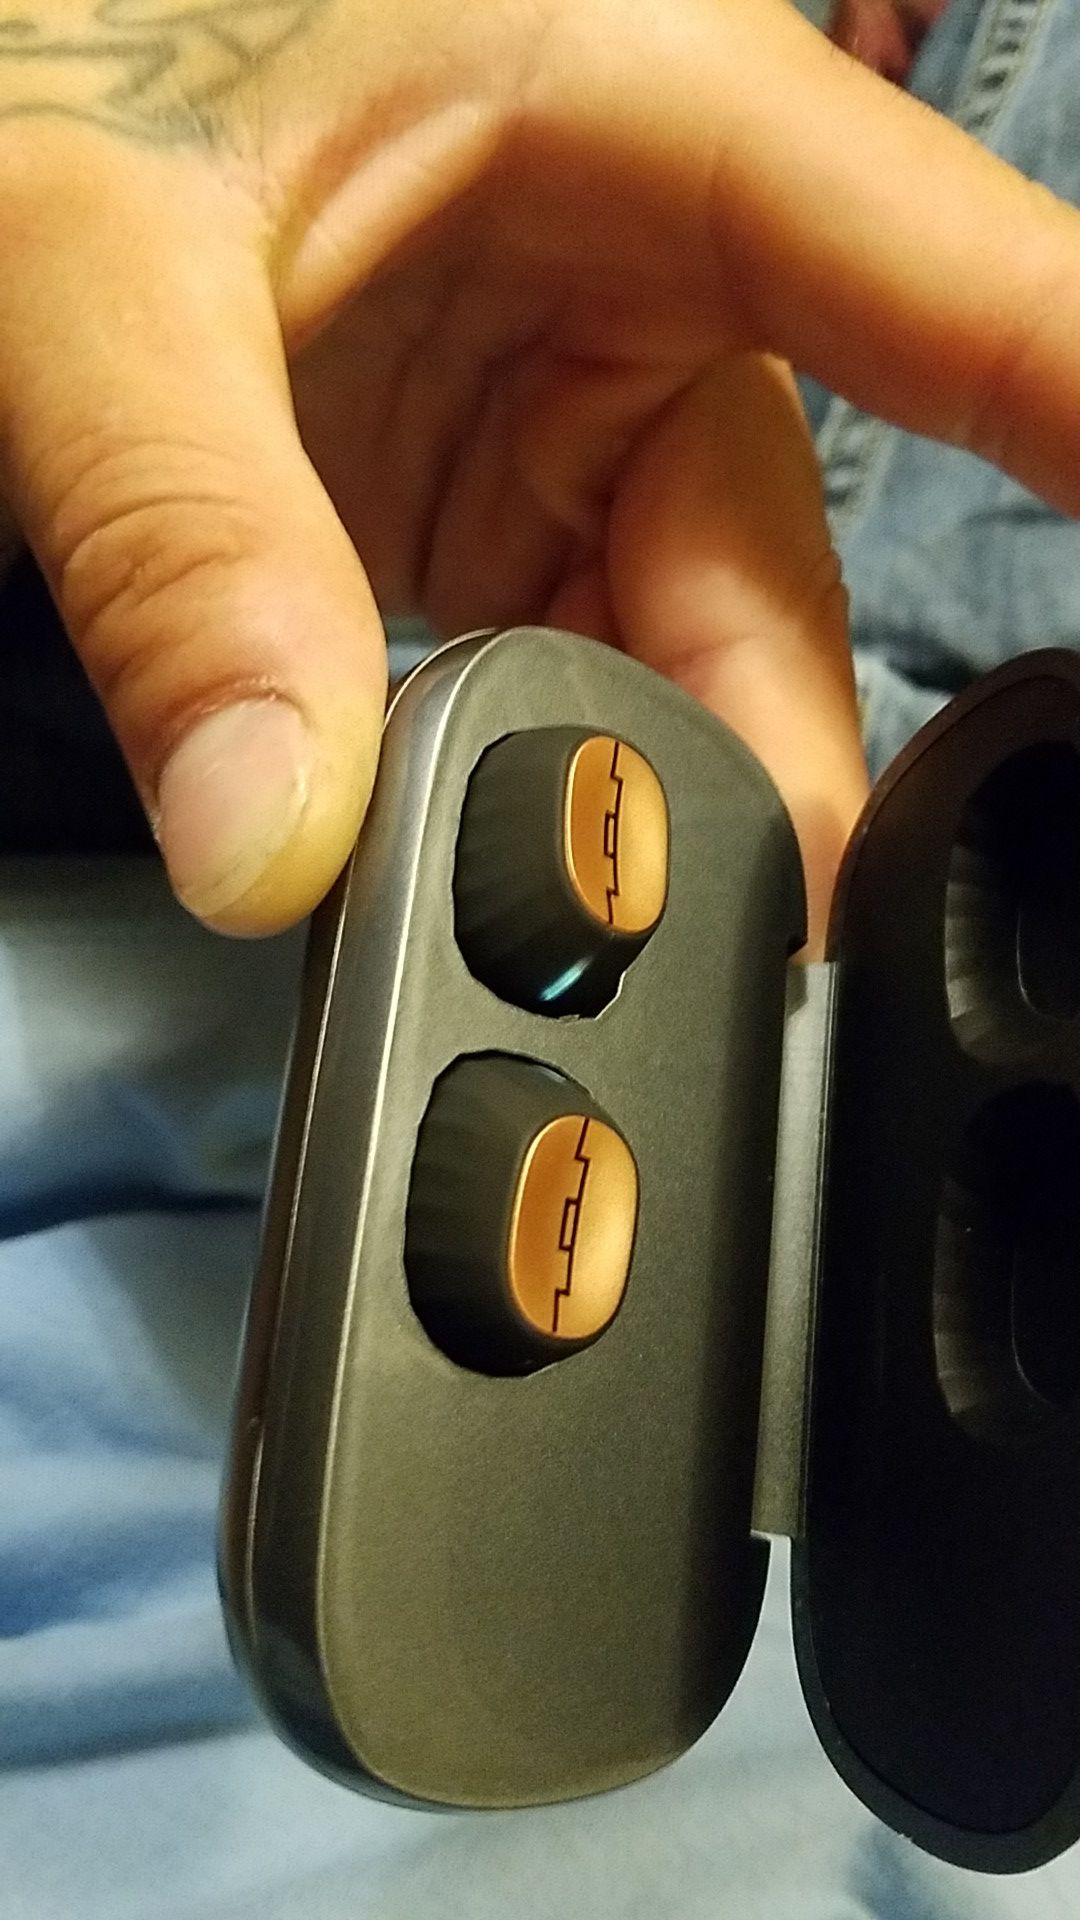 SOL AMP truly wireless earbuds .LIKE NEW